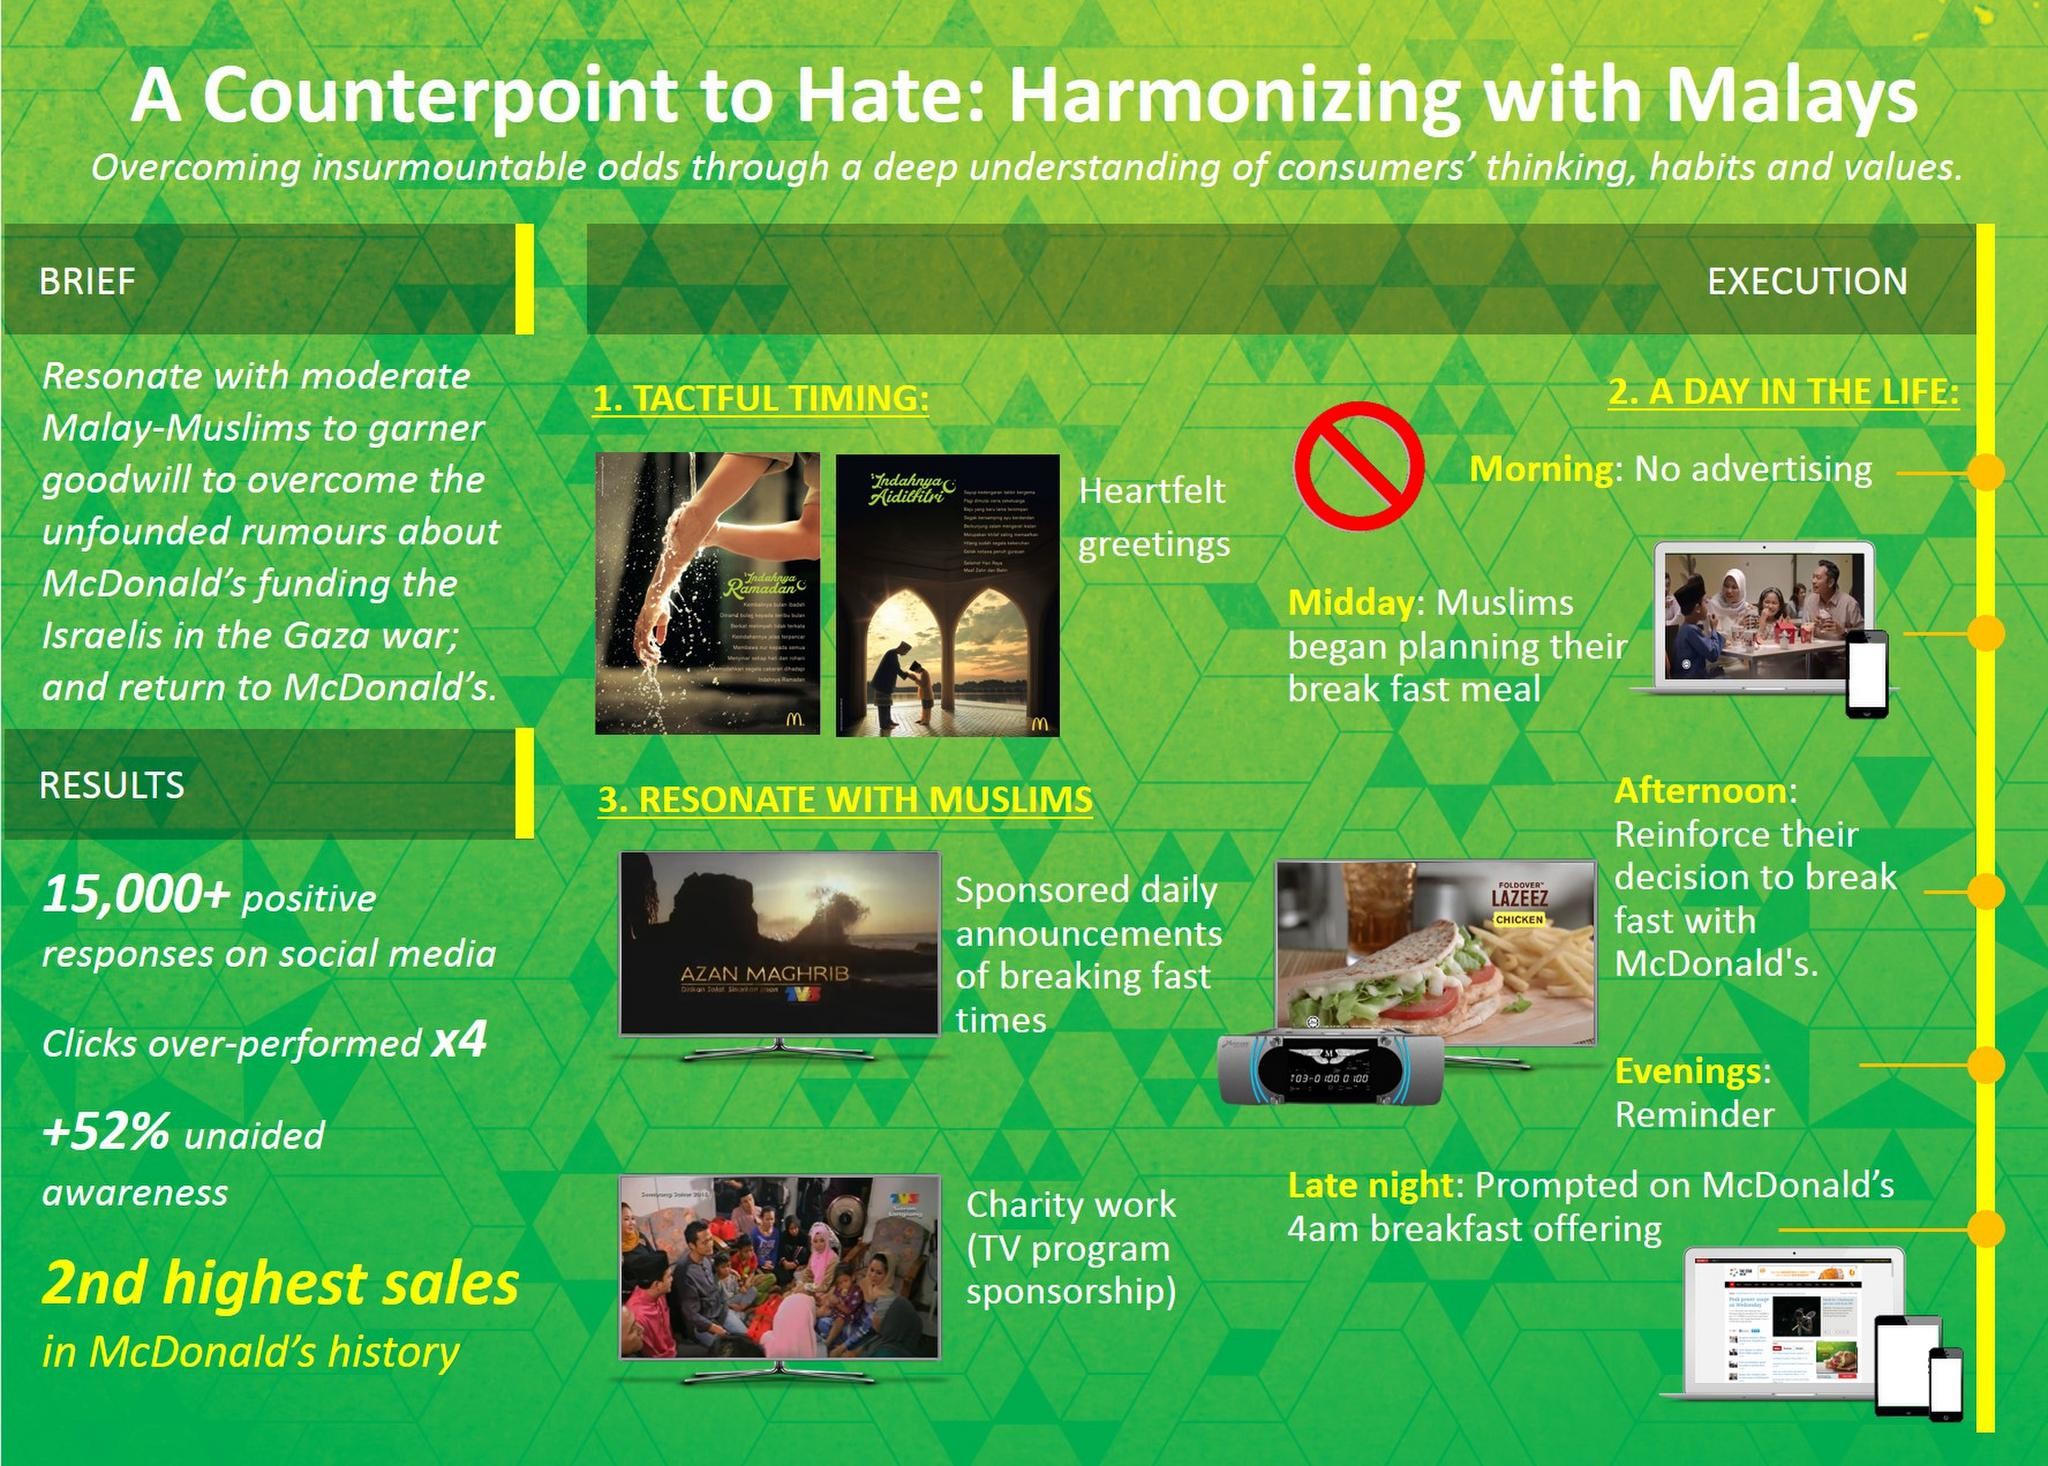 A Counterpoint to Hate: Harmonizing with Malays